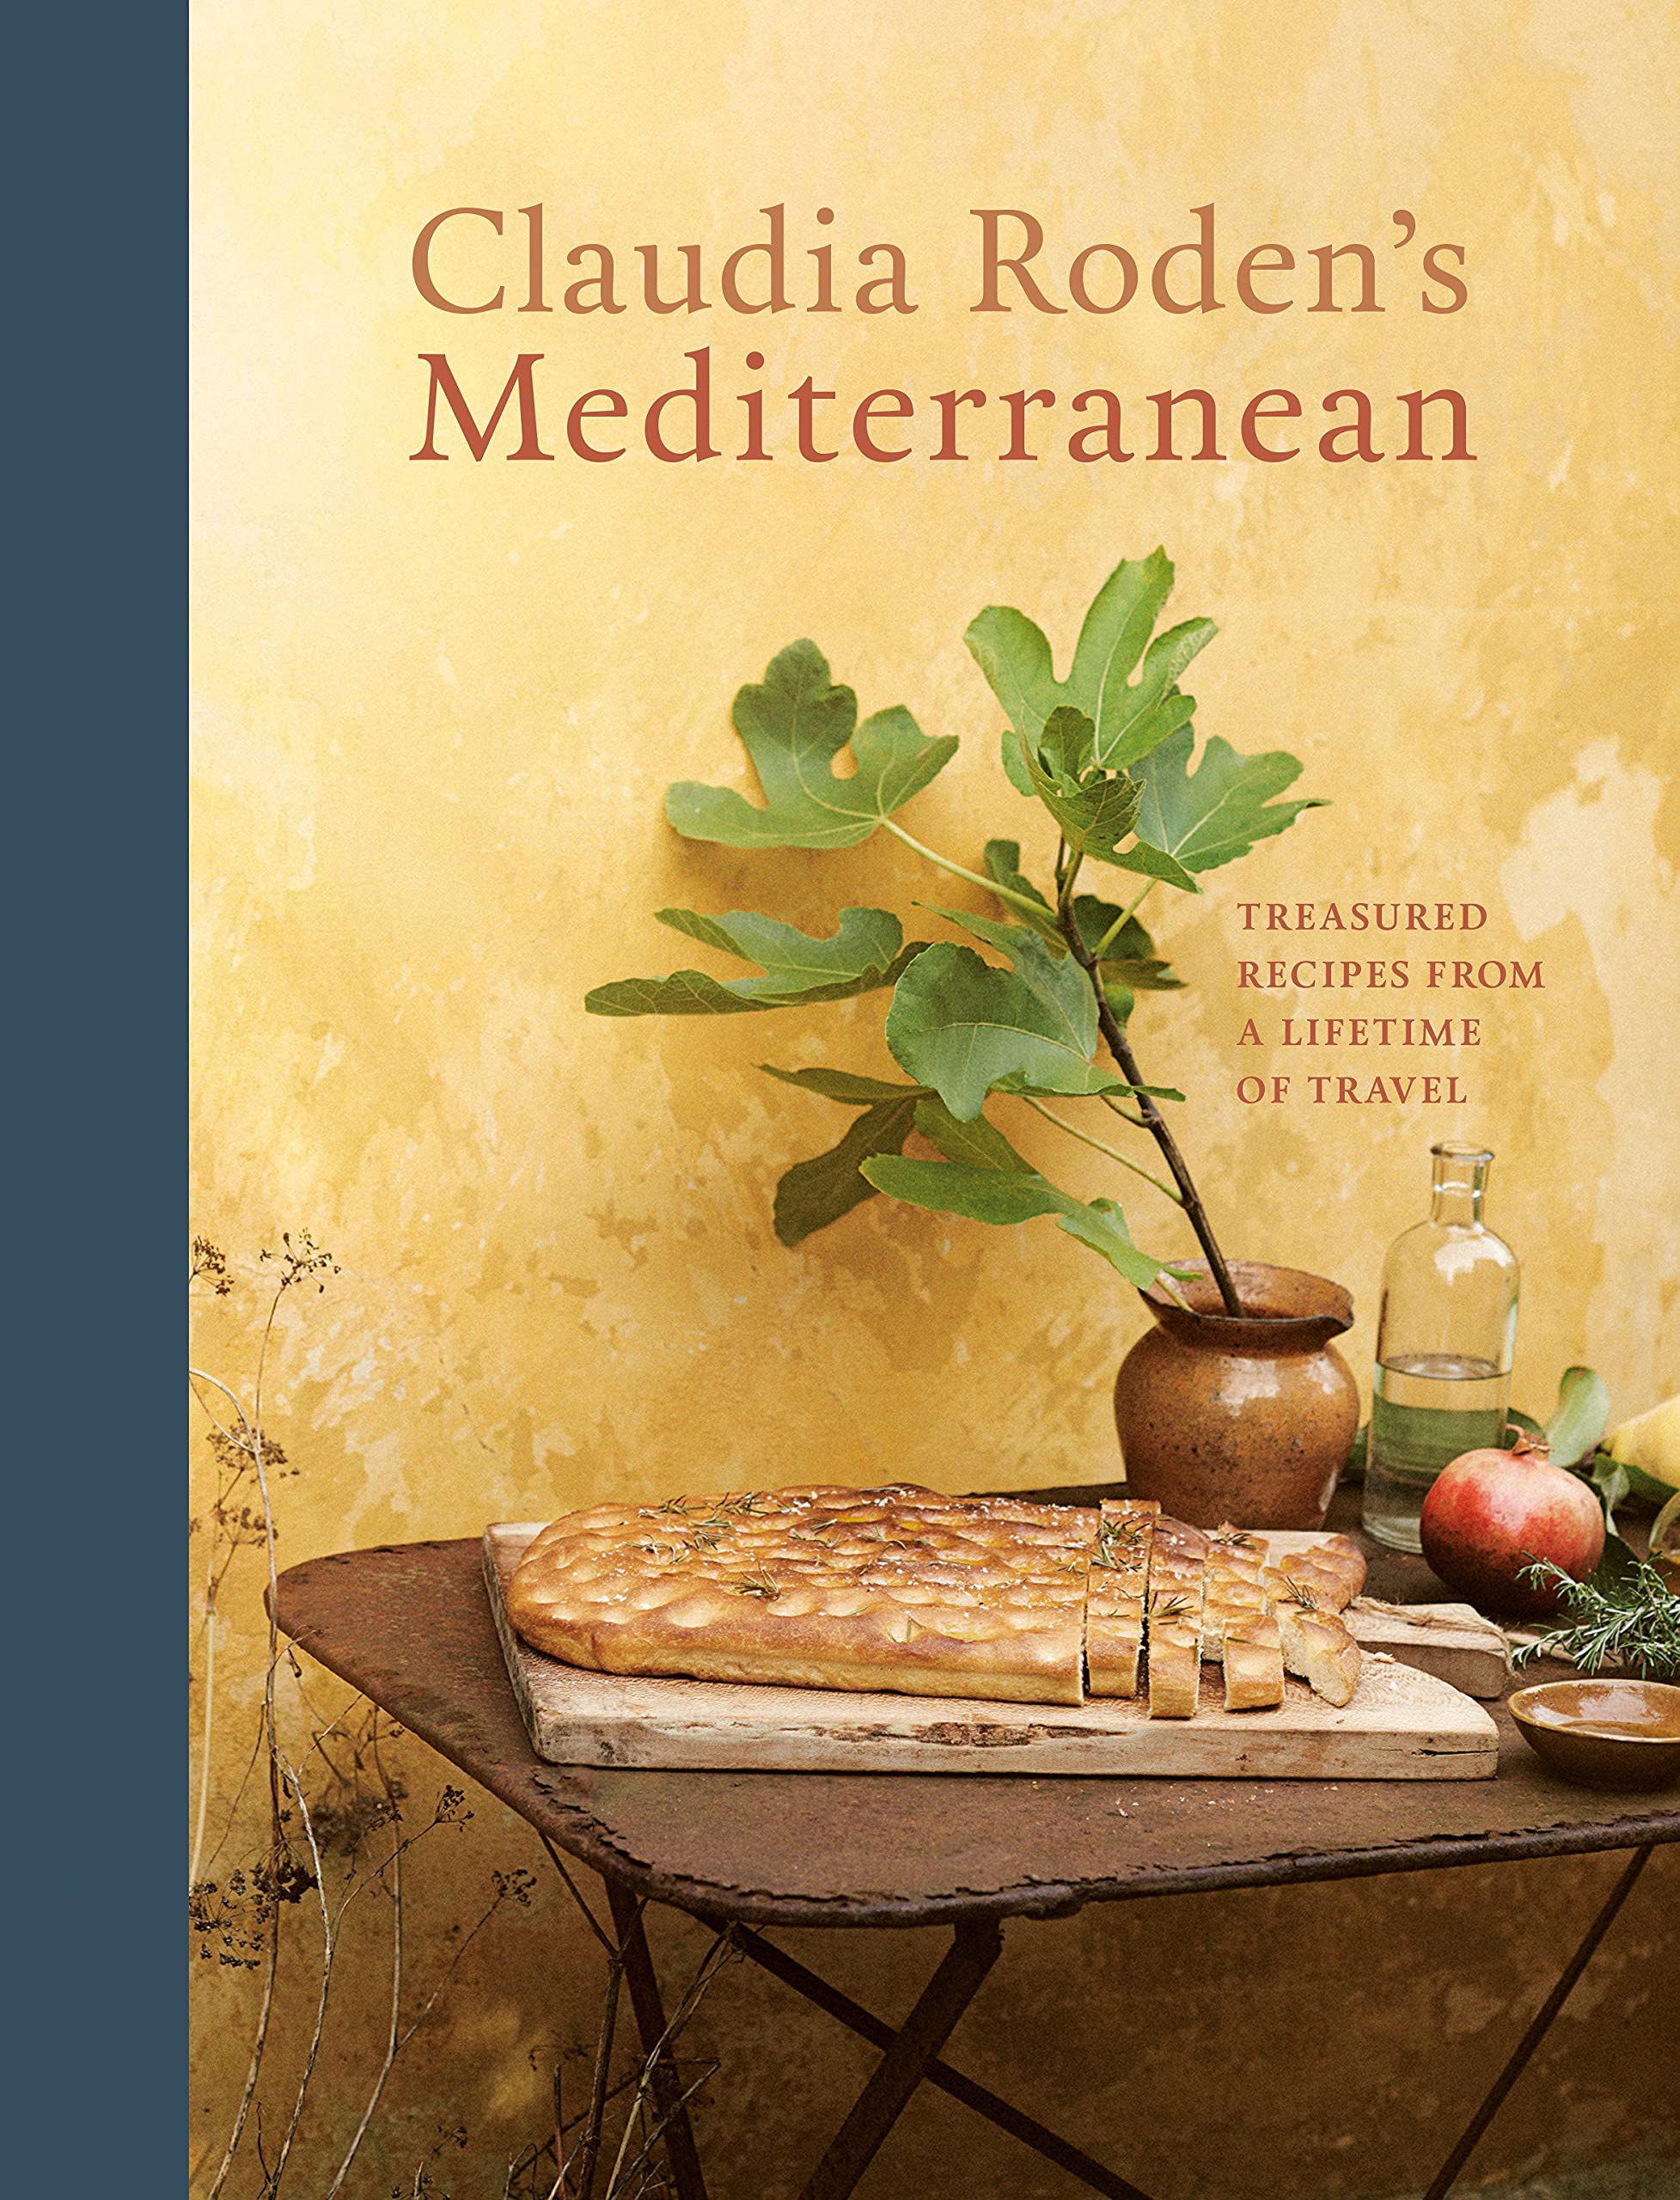 Claudia Roden's Mediterranean: Treasured Recipes from a Lifetime of Travel (Claudia Roden) *Signed*